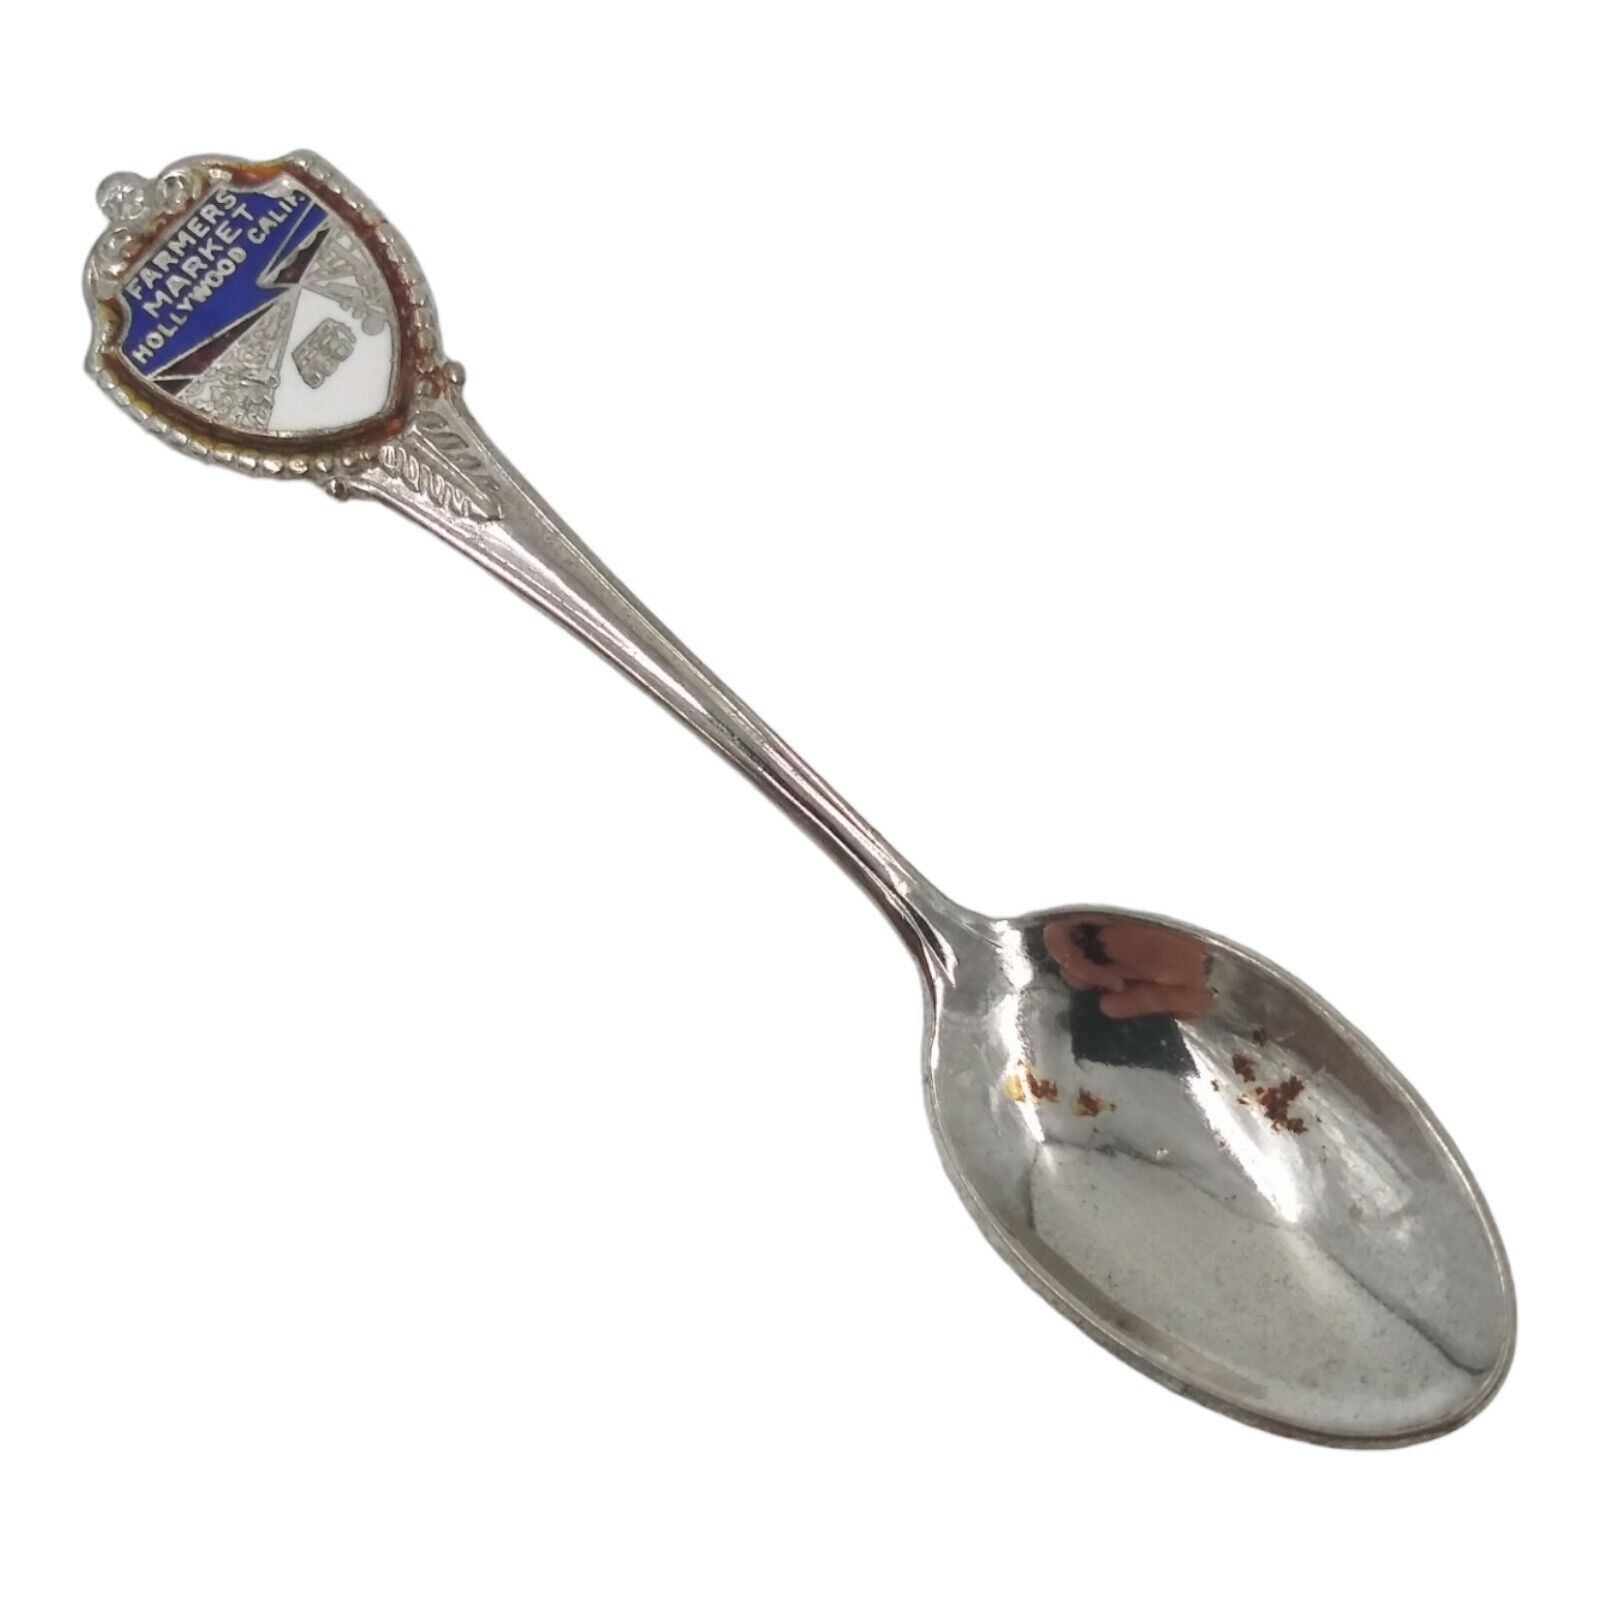 Vintage Farmers Market Hollywood California Souvenir Spoon US State Collectible